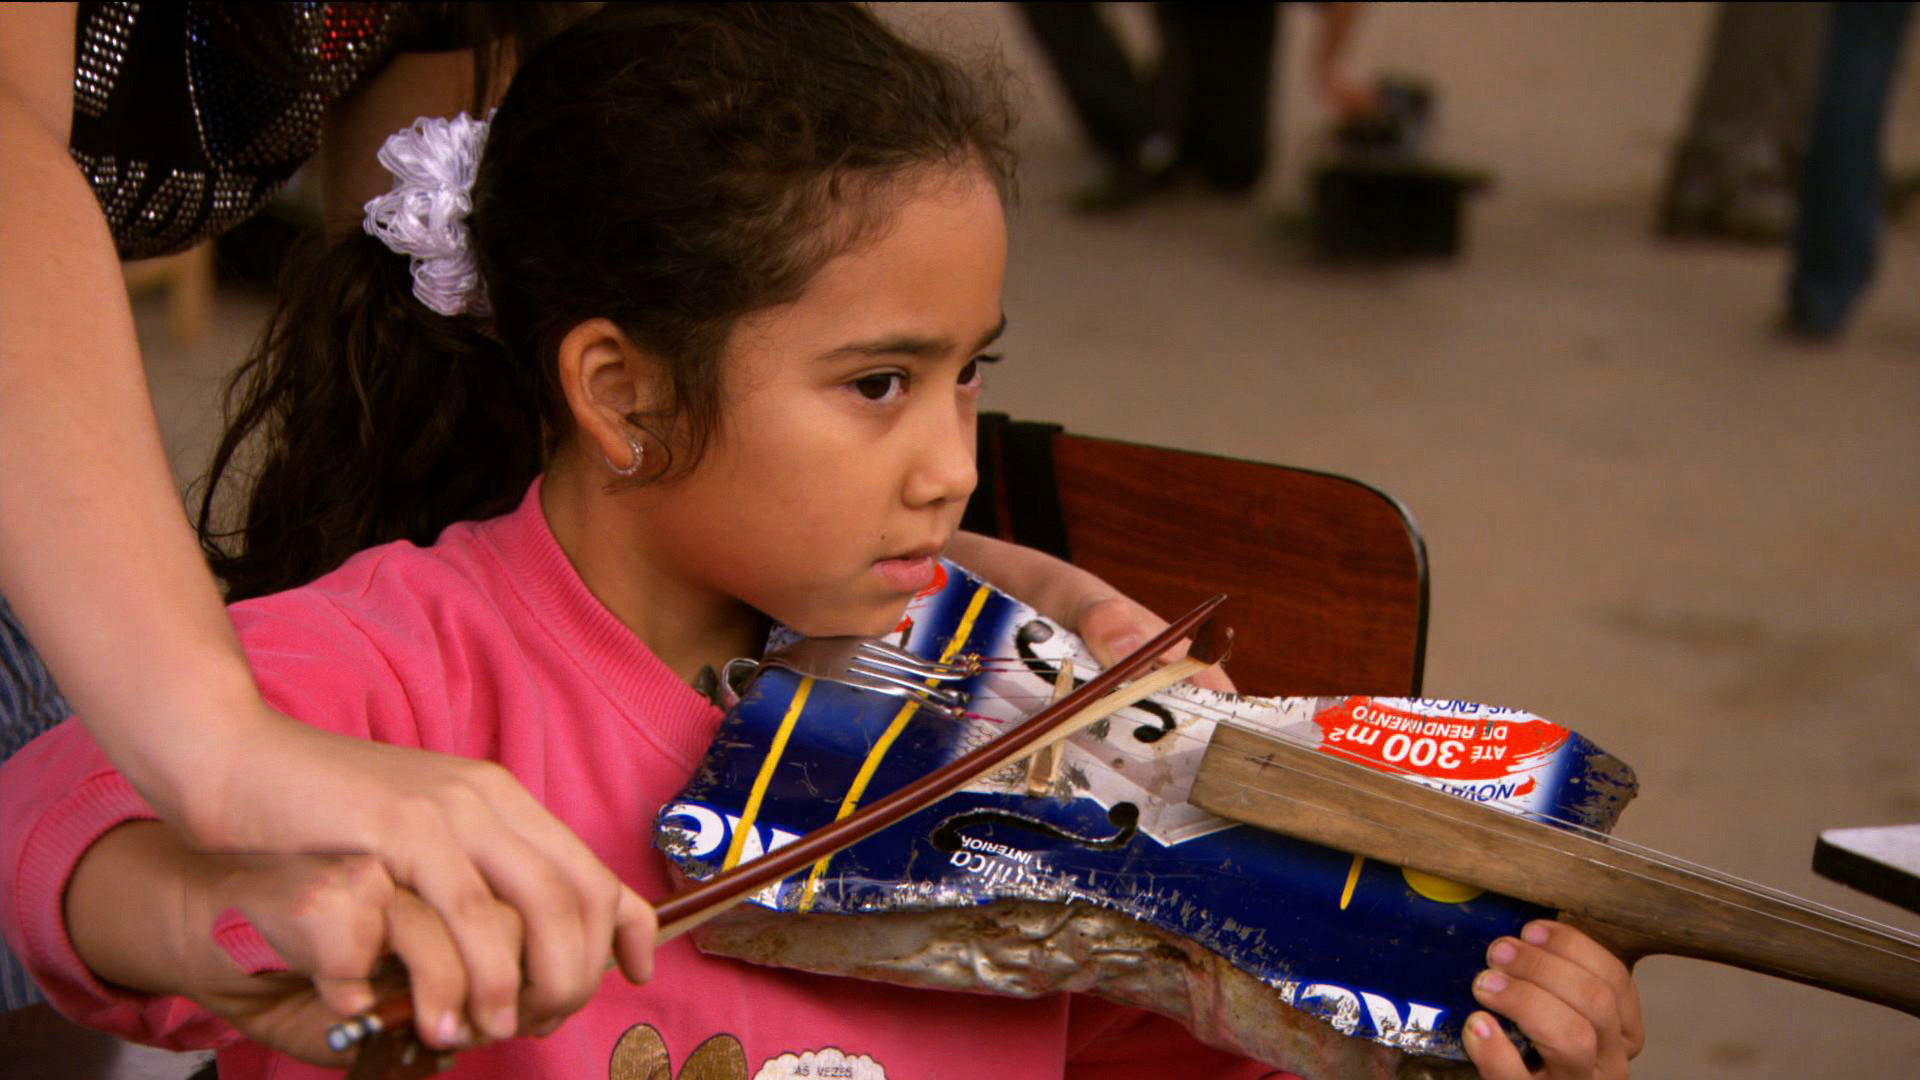 The Recyclers: From trash comes triumph - CBS News